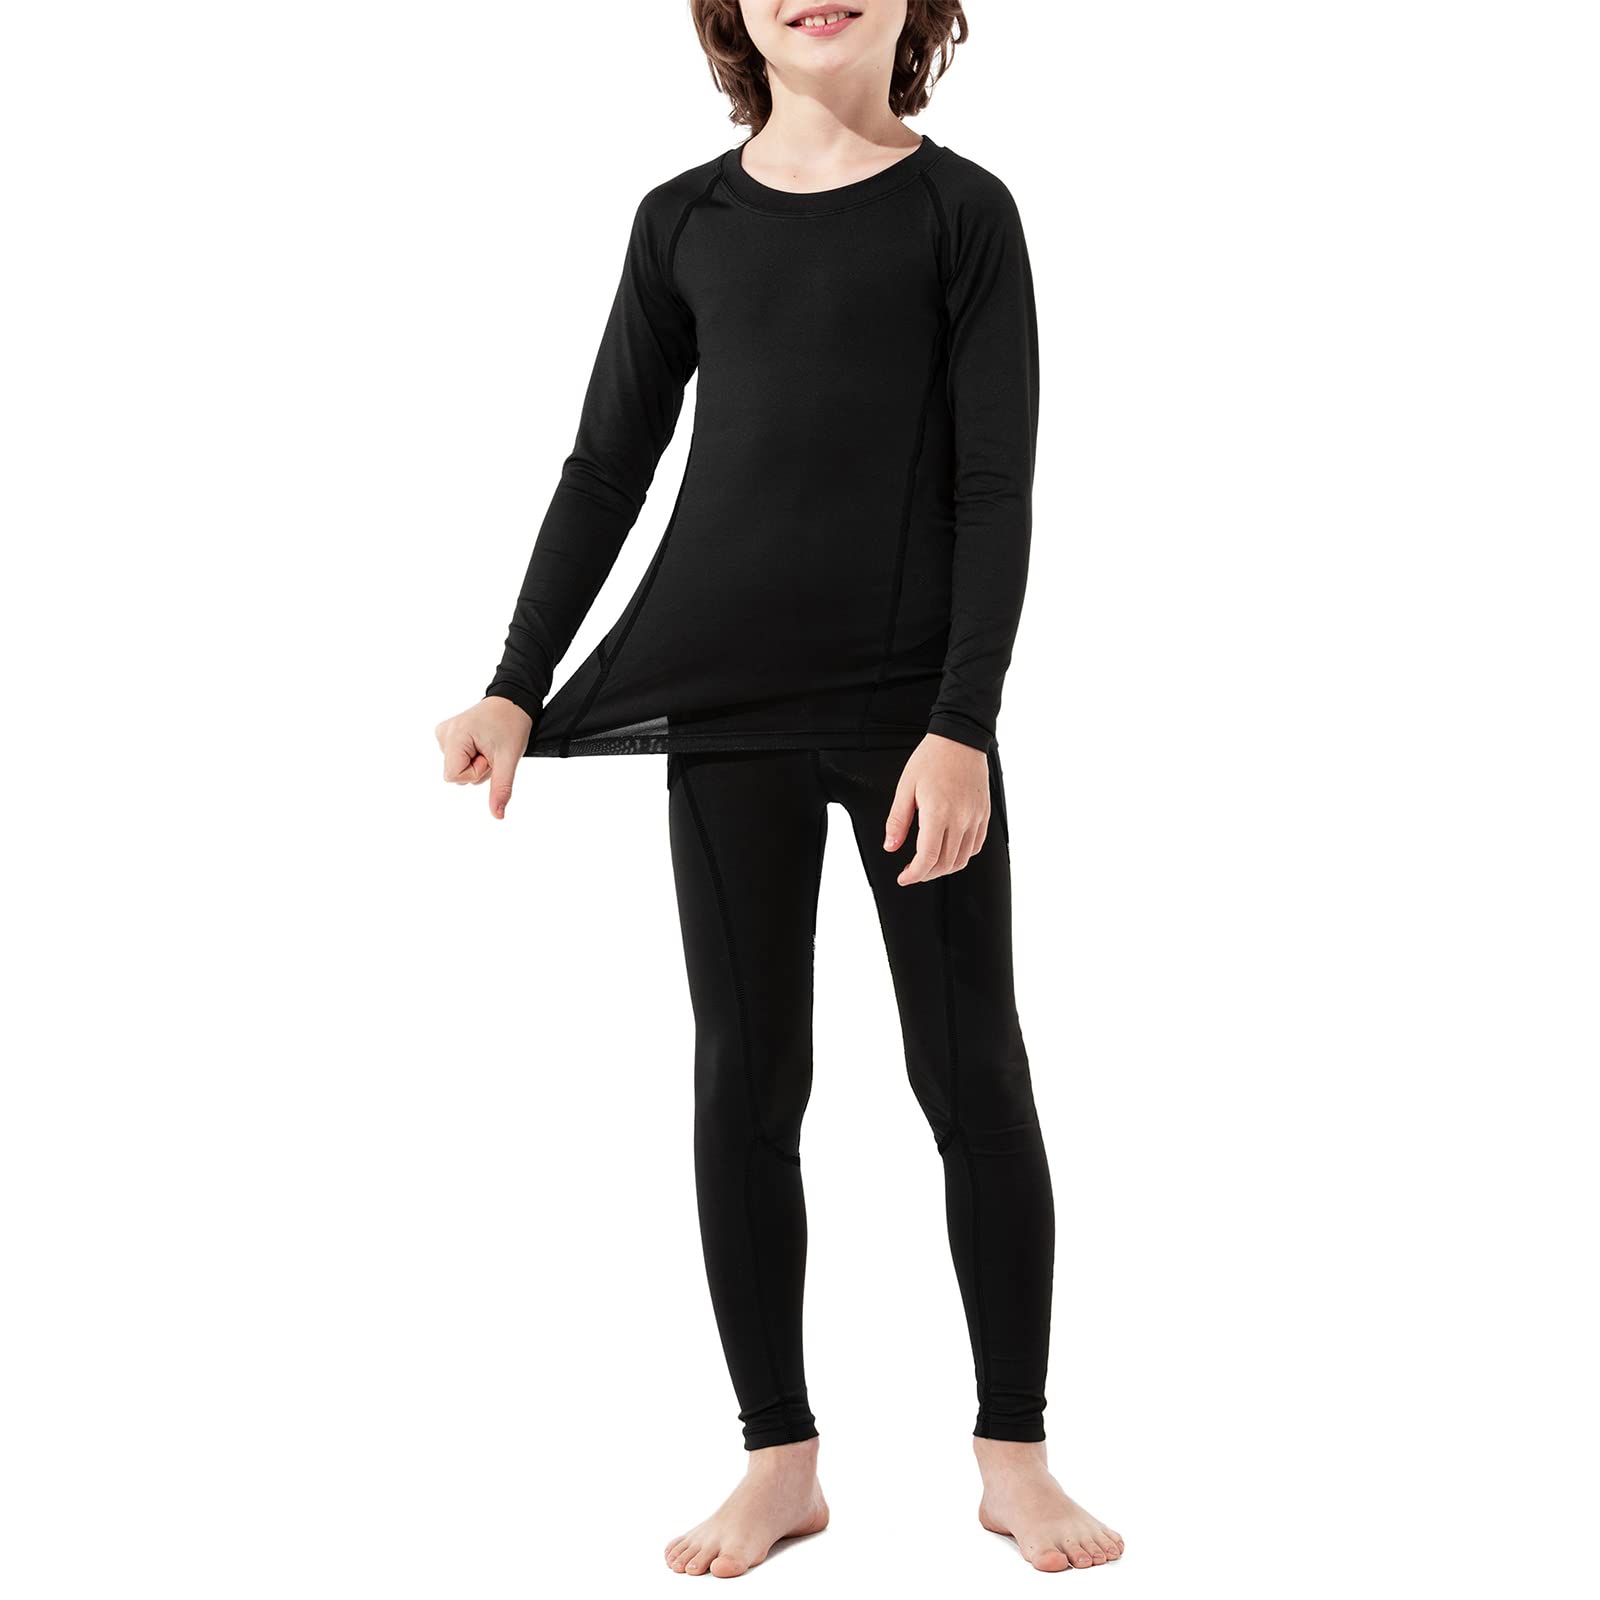 American Trends Youth Boys Long Sleeve Compression Shirts and